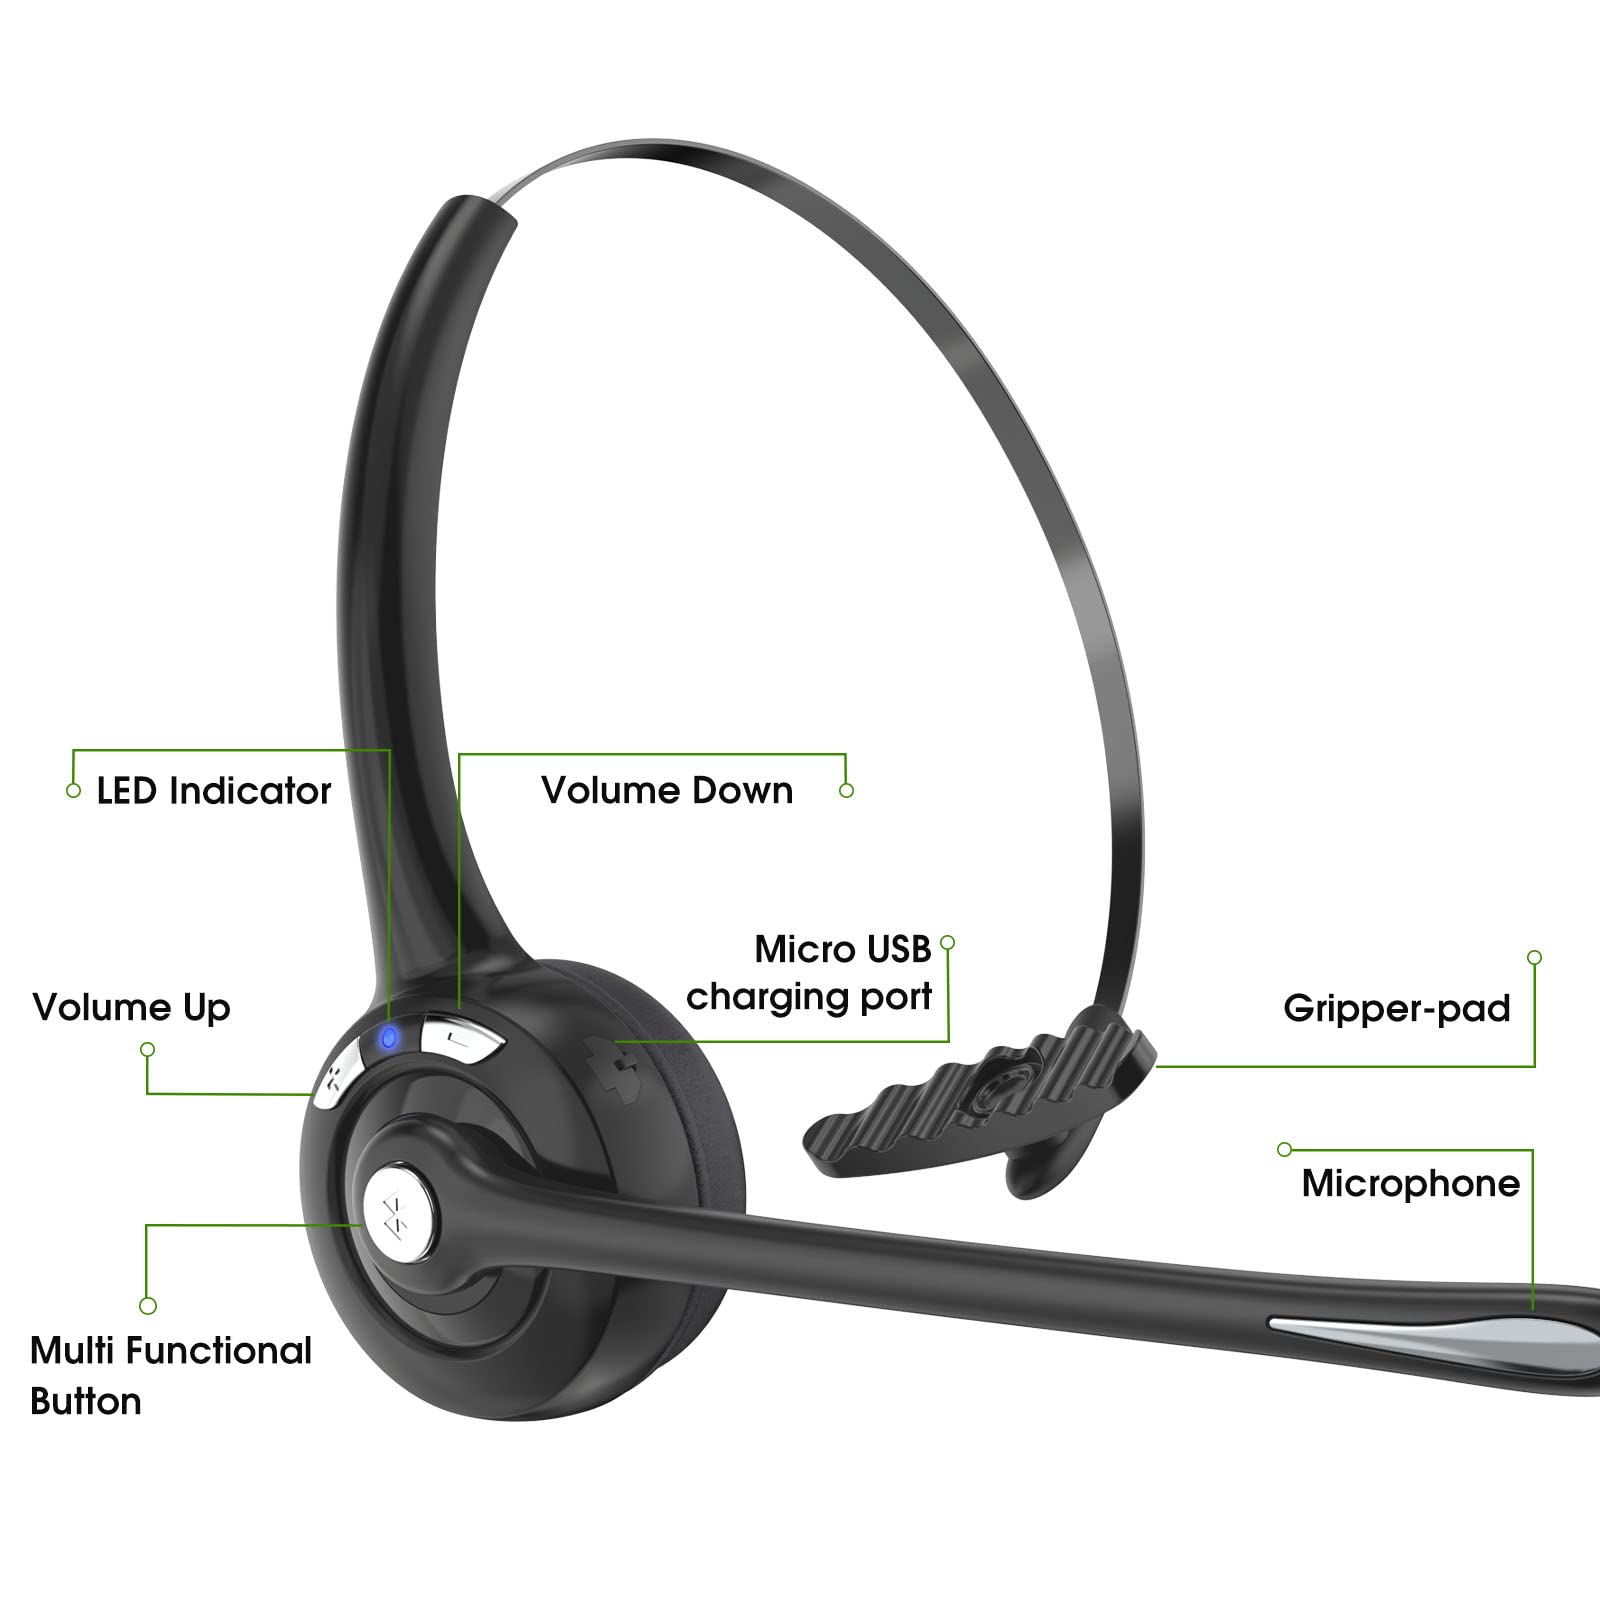 Bluetooth Headset with Microphone,V5.1,Noise Canceling Wireless On Ear Headphones, Bluetooth Headphones with Mic, Phone Headset Mute Button for Laptop, Skype, Call Centers, Office, Trucker